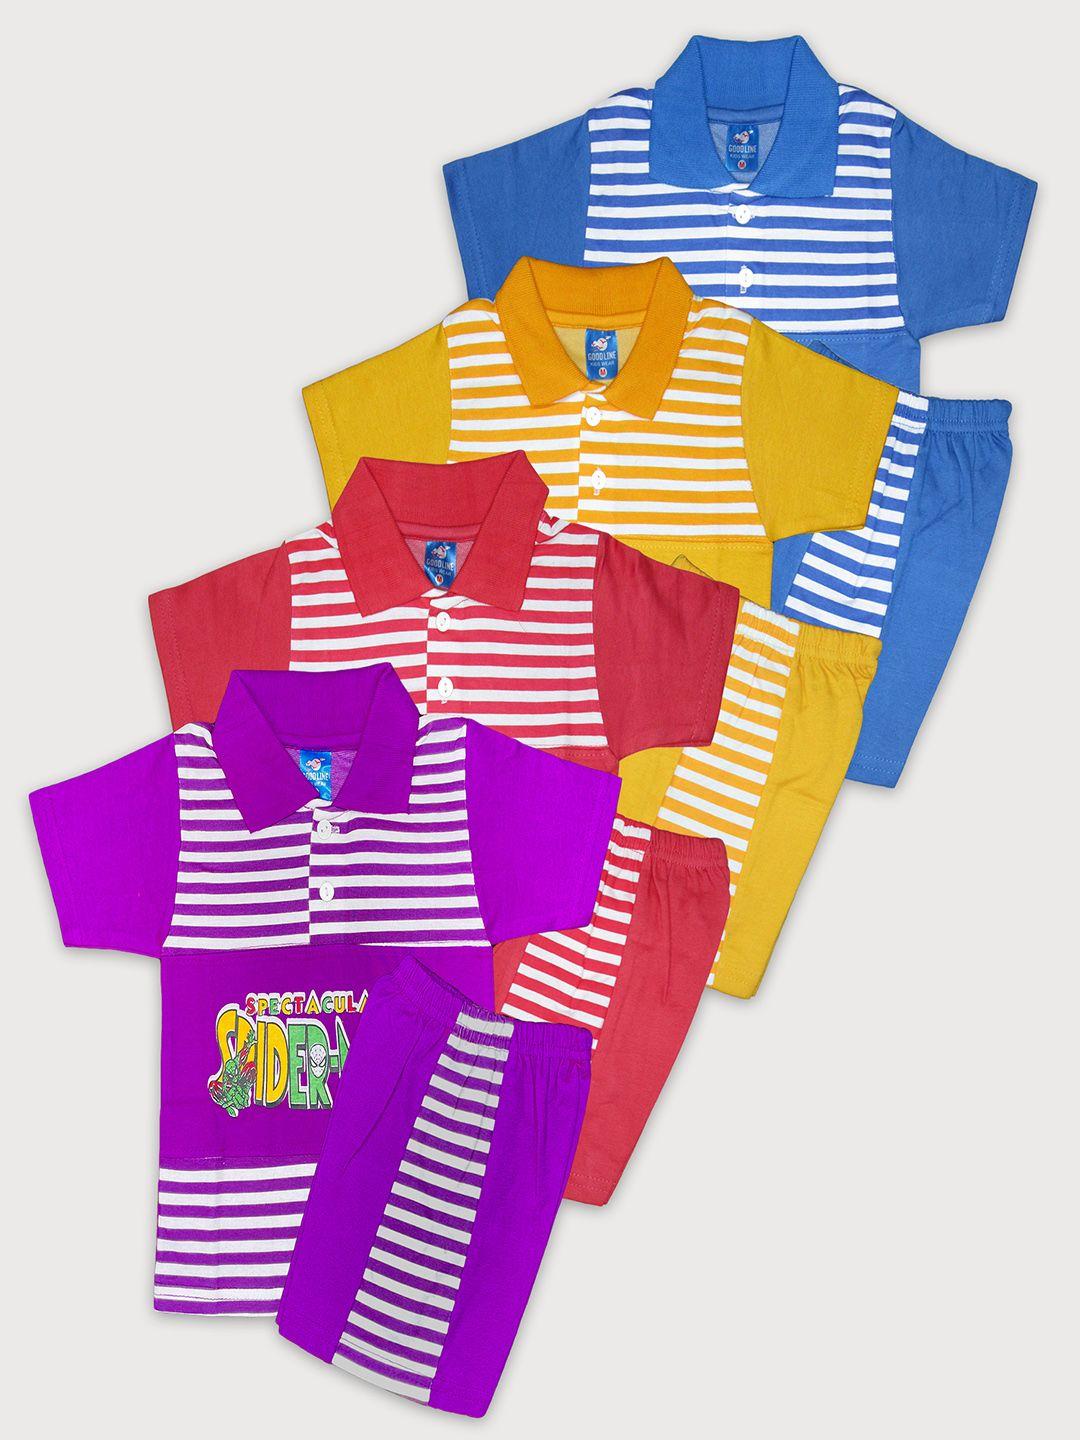 peerless wear boys striped shirt with trousers